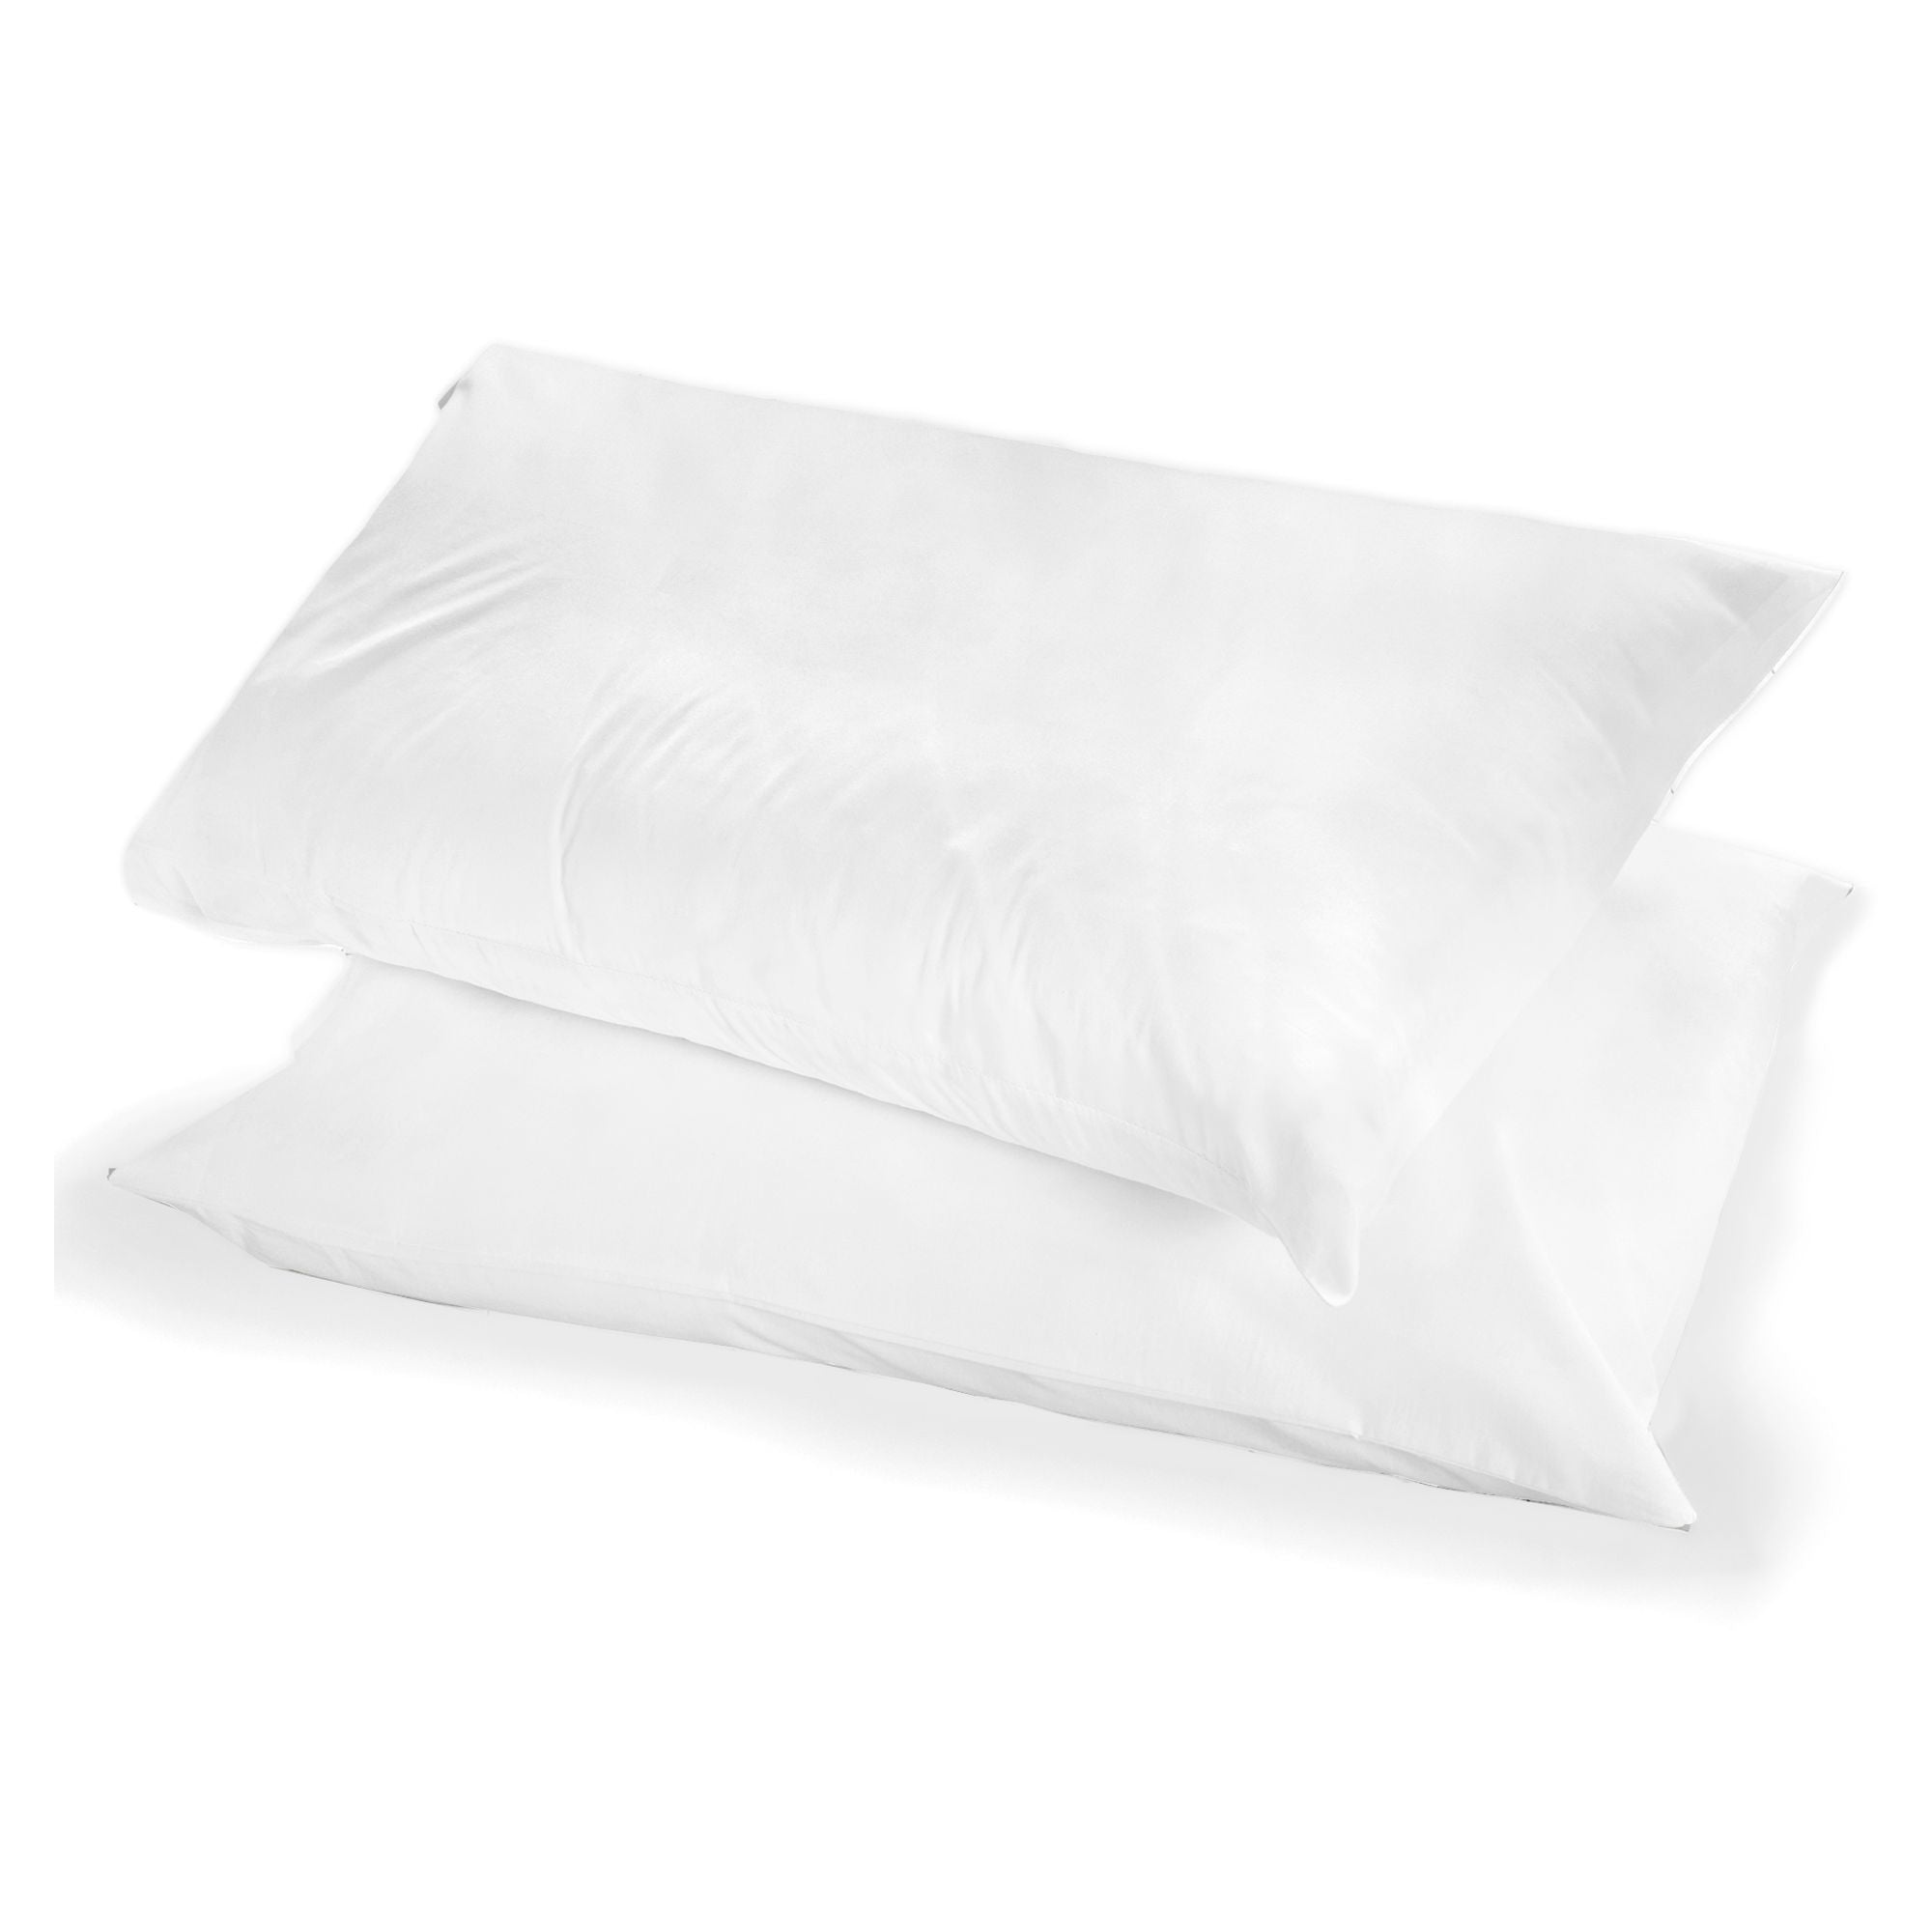 200TC Plain Dye Pair of Housewife Pillowcases by Appletree Boutique in White 50 x 75cm - Pair of Housewife Pillowcases - Appletree Boutique